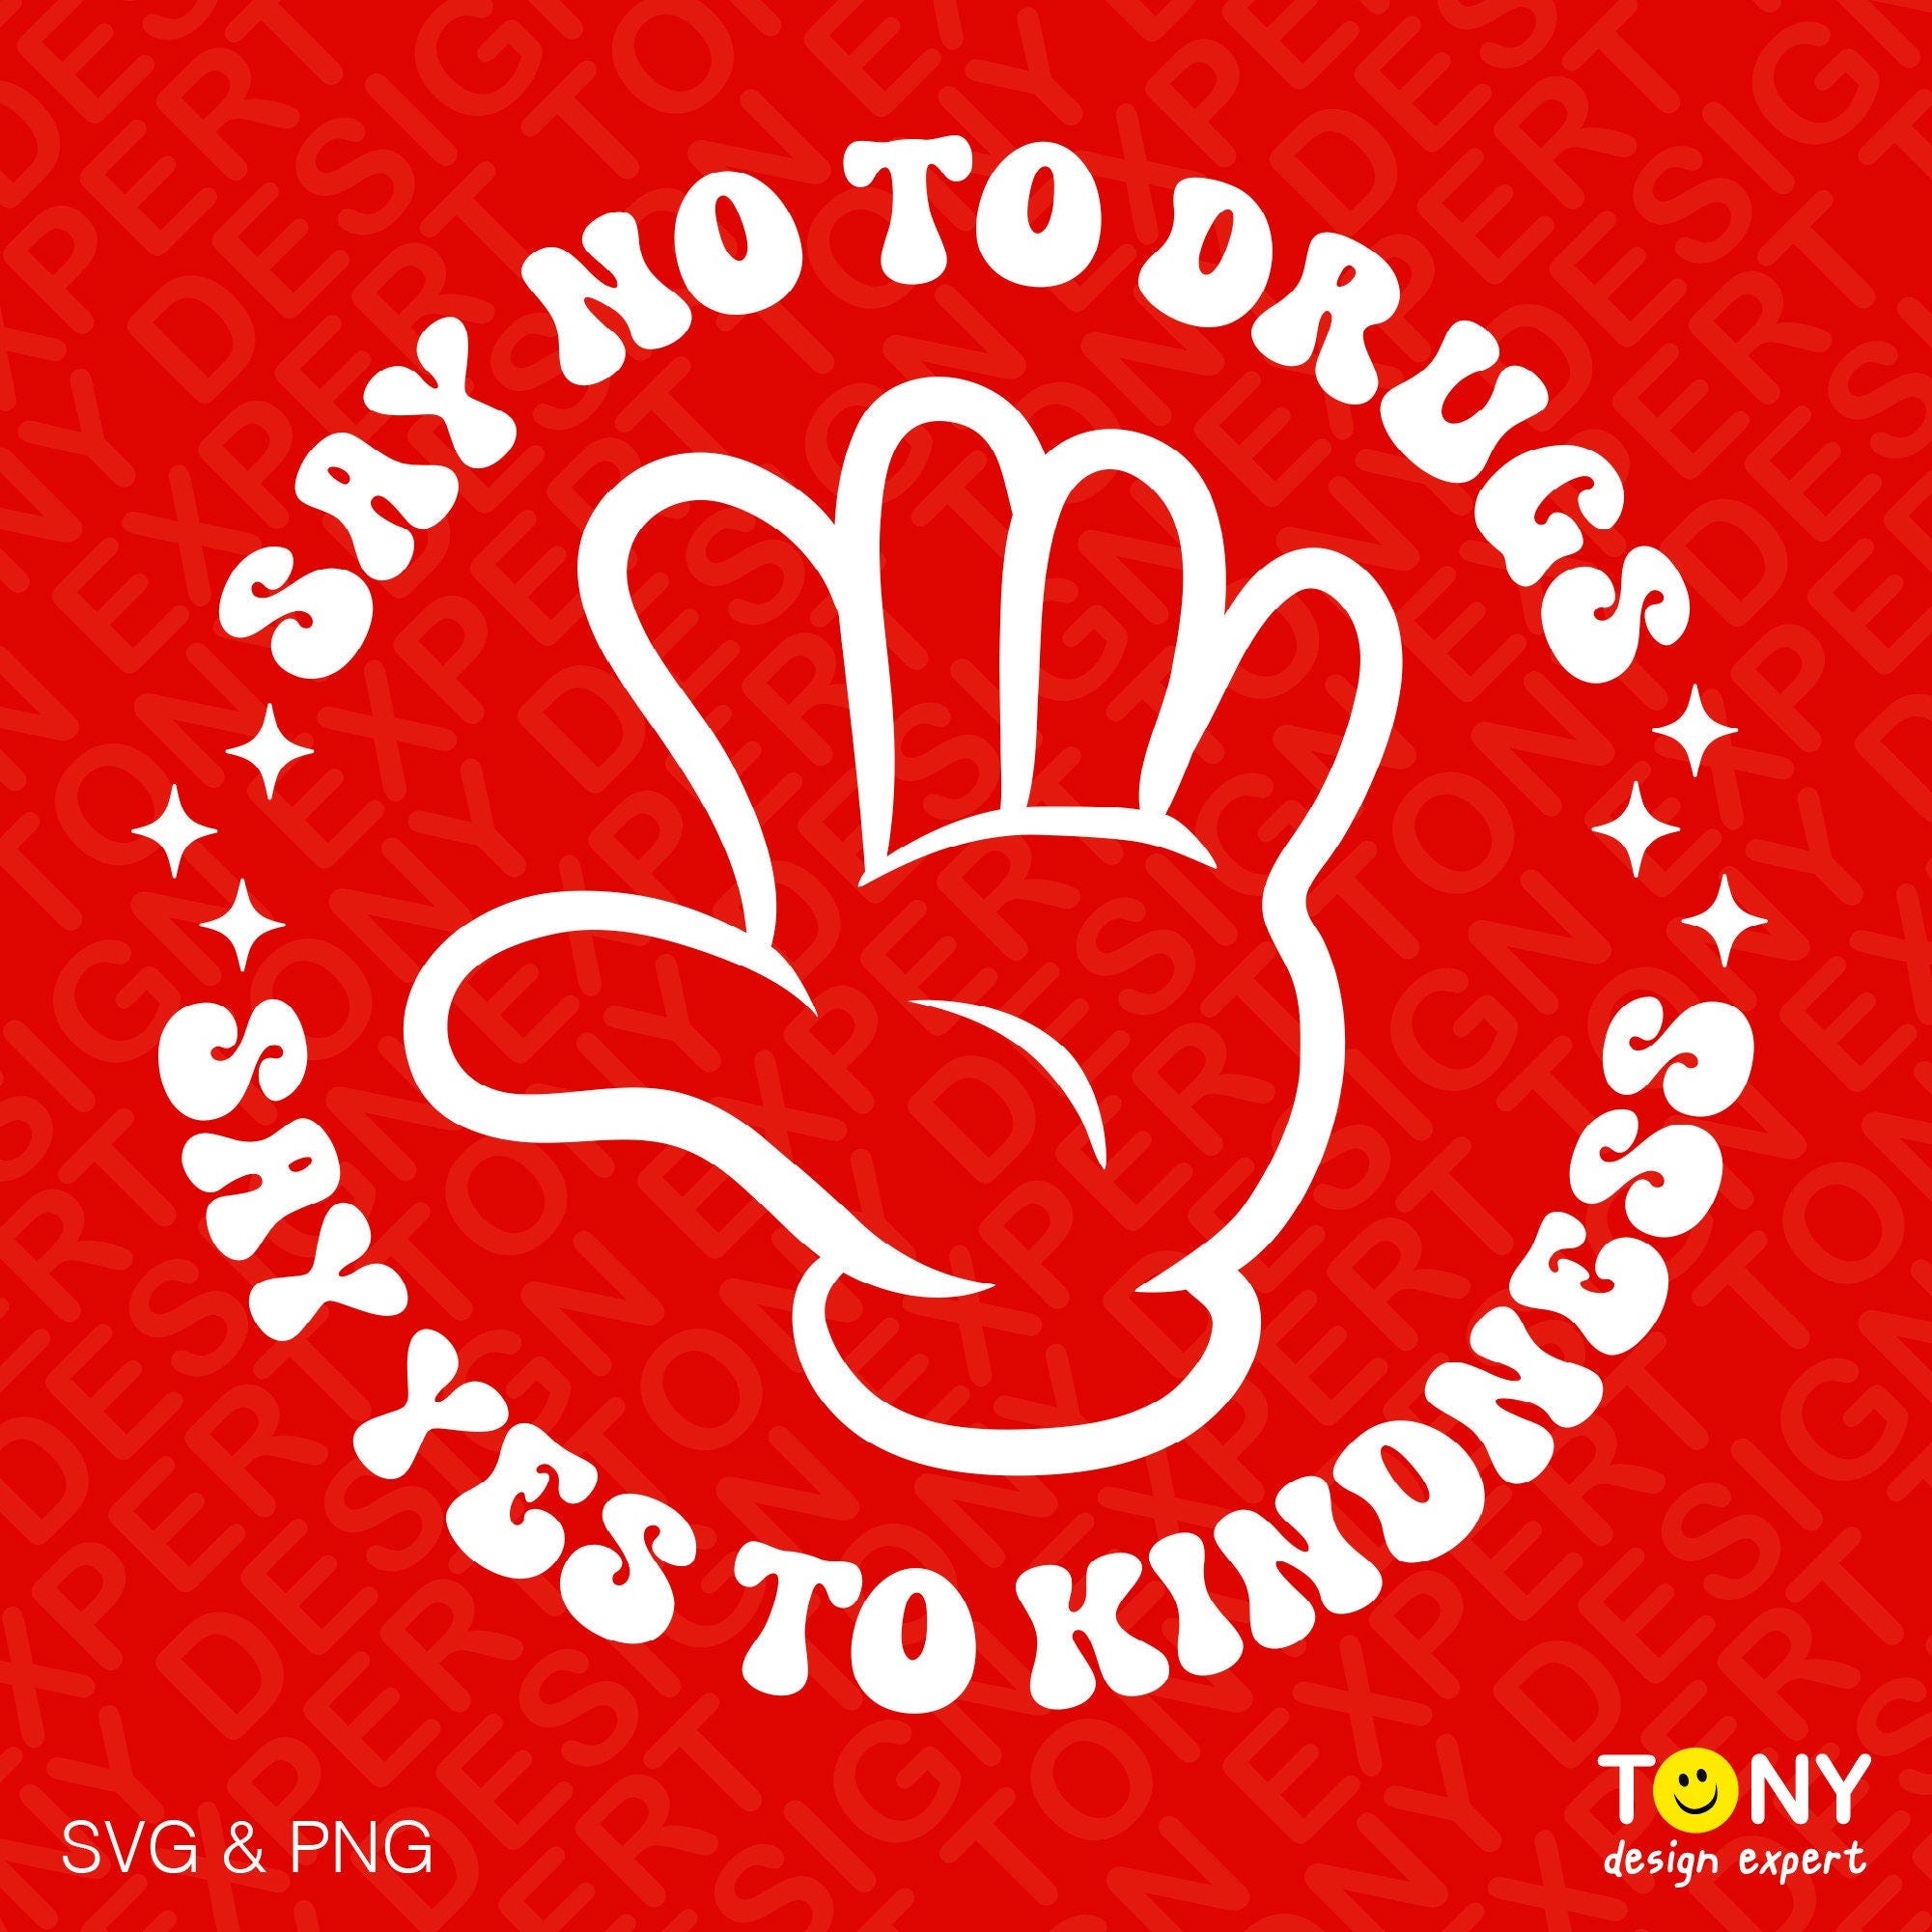 Say No to Drugs Svg Png, Say Yes to Kindness Svg, Red Ribbon Week Svg Png, Trendy Funny Groovy Digital Download Sublimation PNG & SVG Cricut